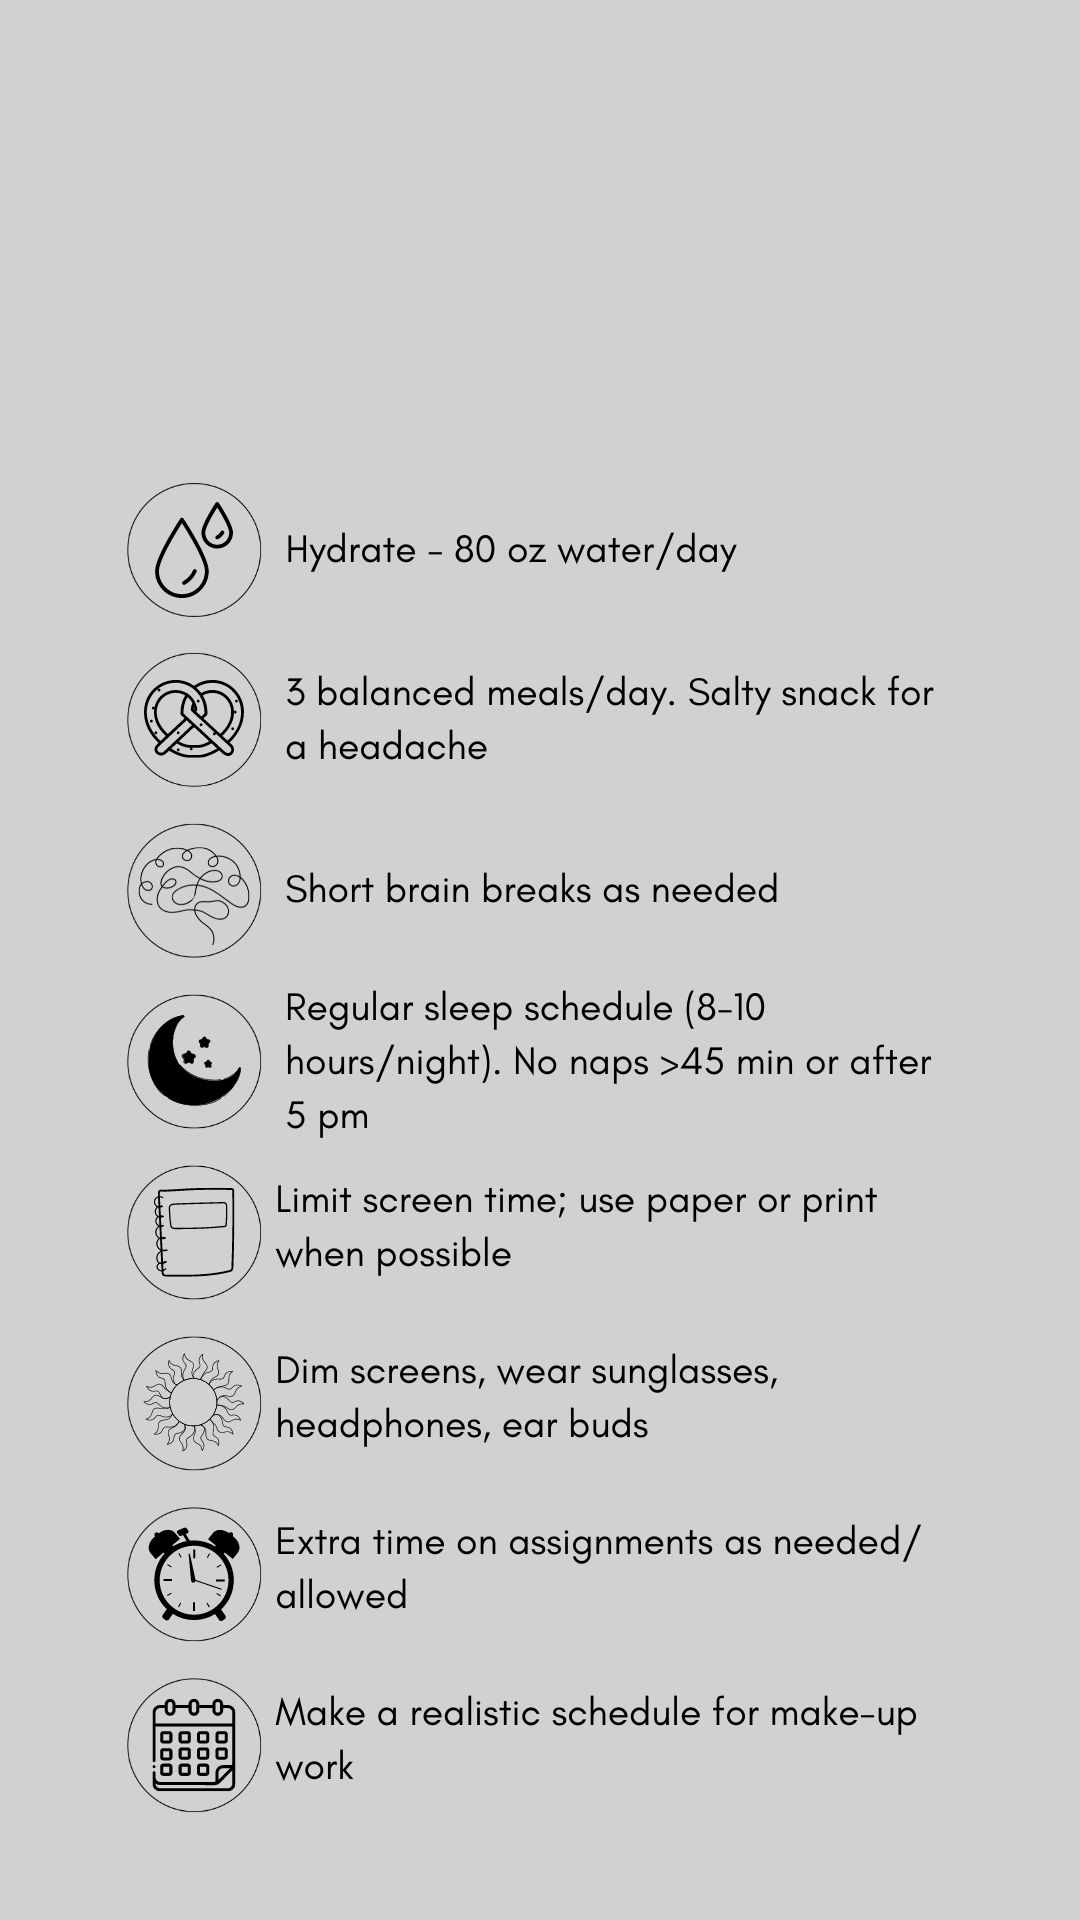 Black text and graphics with concussion treatment tips against a gray backdrop. The tips include hydrate (80 oz. water/day). Eat 3 balanced meals/day, salt snack for headache. Short brain breaks as needed, Sleep time (8-10 hrs/night), no naps > 45 mins. or after 5 pm. Limit screens, use paper/print. when possible .Dim screens. wear sunglasses, headphones, earbuds. Allow extra time on assignments as allowed. Pace yourself. Make a realistic schedule for make-up work.